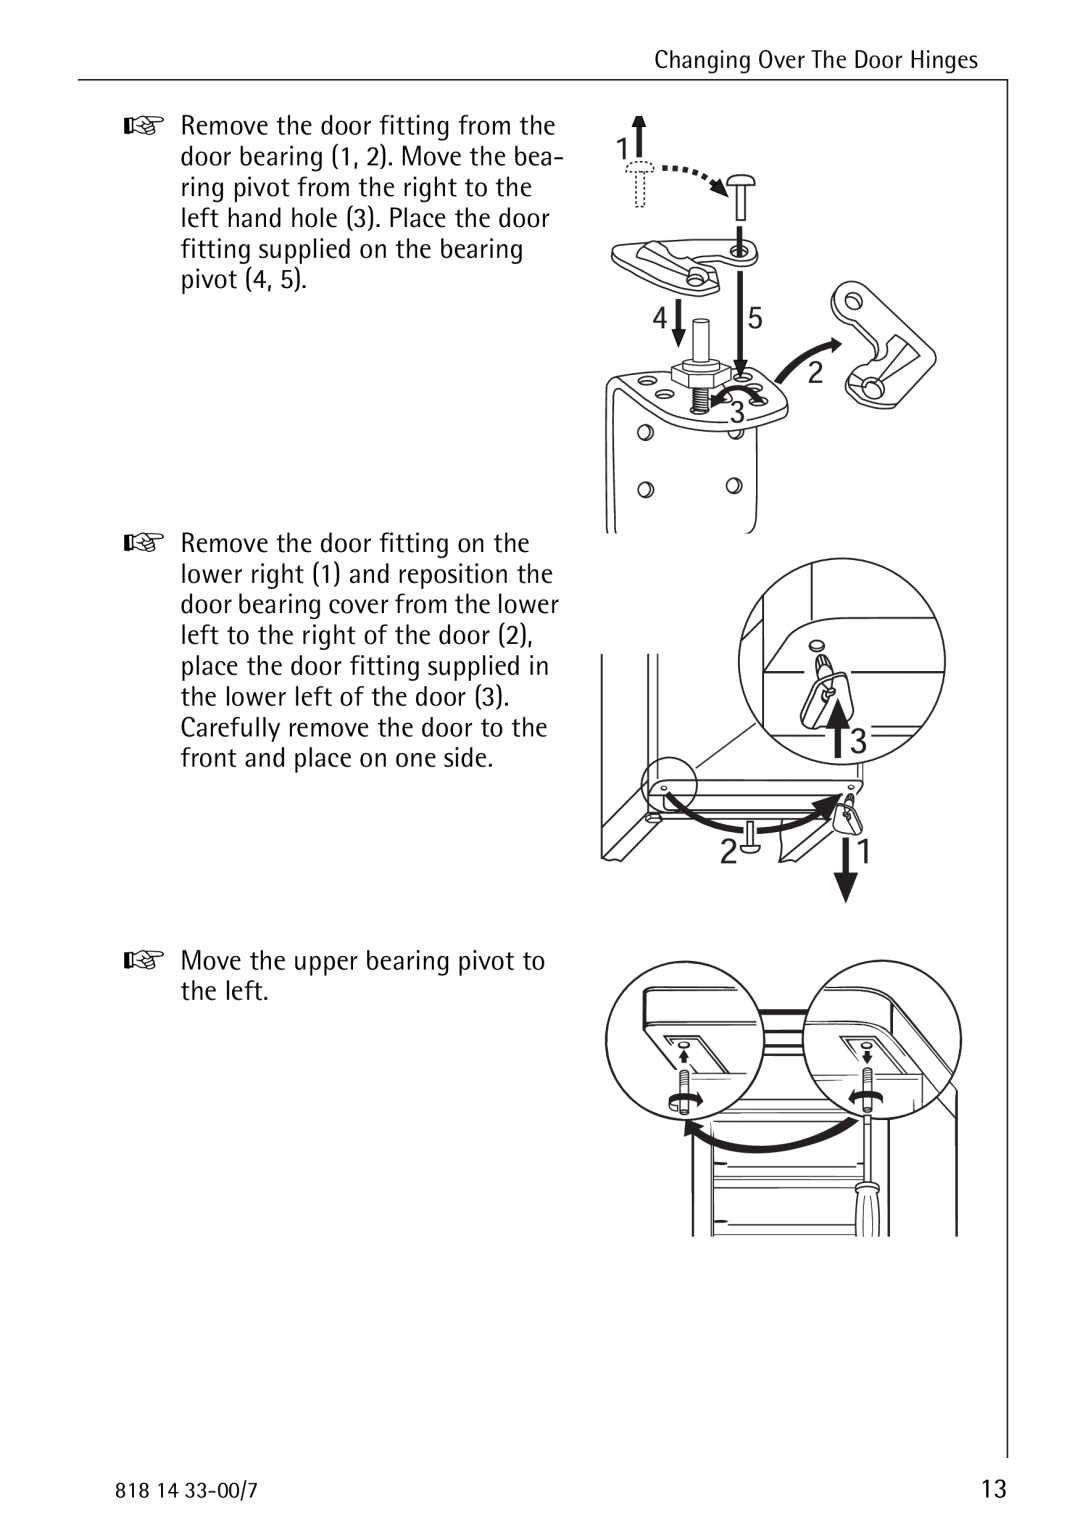 Electrolux 2170-4 operating instructions Move the upper bearing pivot to the left 